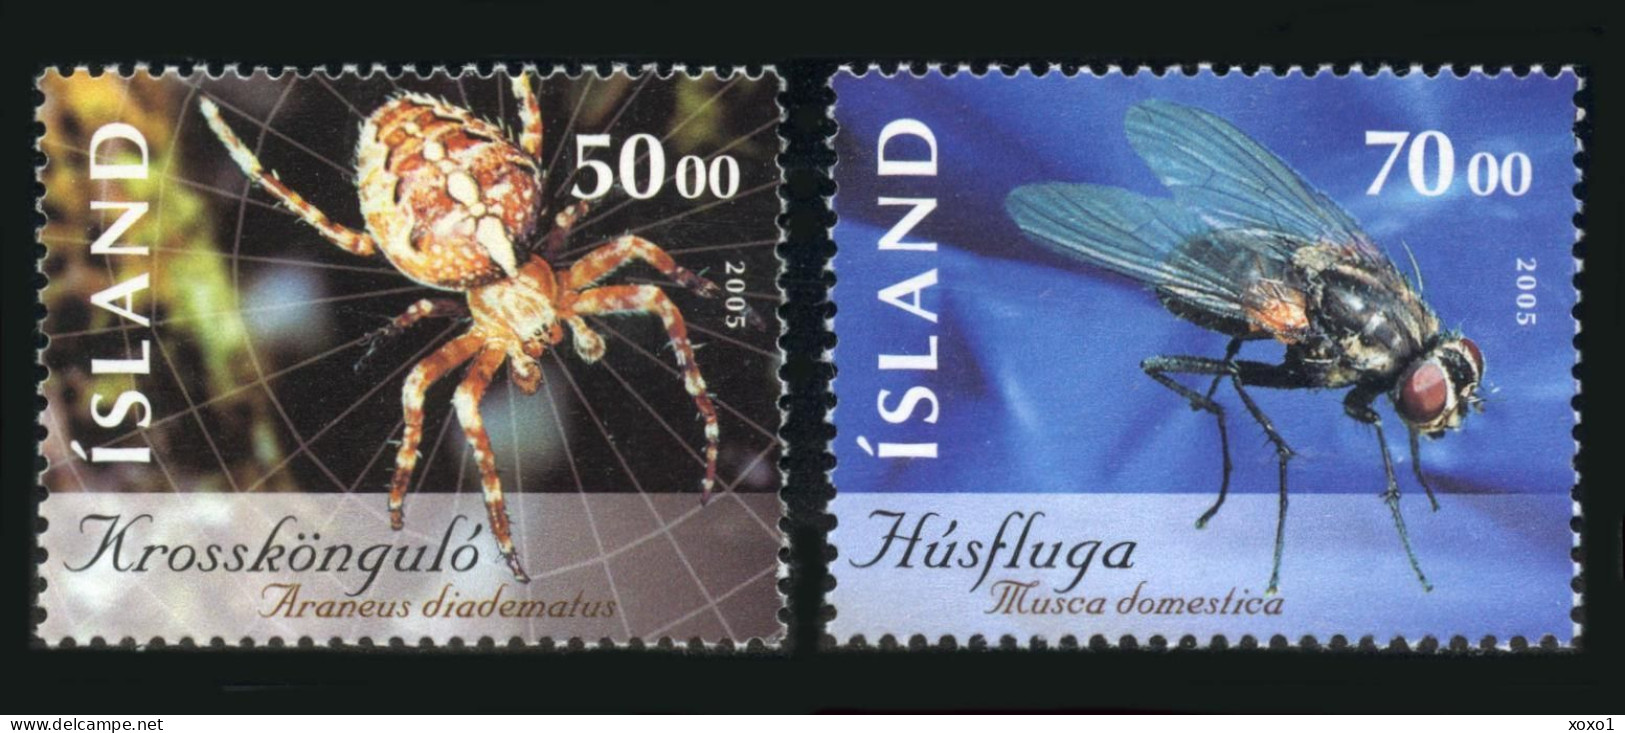 Iceland 2005  MiNr. 1075 - 1076 Island Insects And Spiders  # 2     2v  MNH** 3.50 € - Käfer